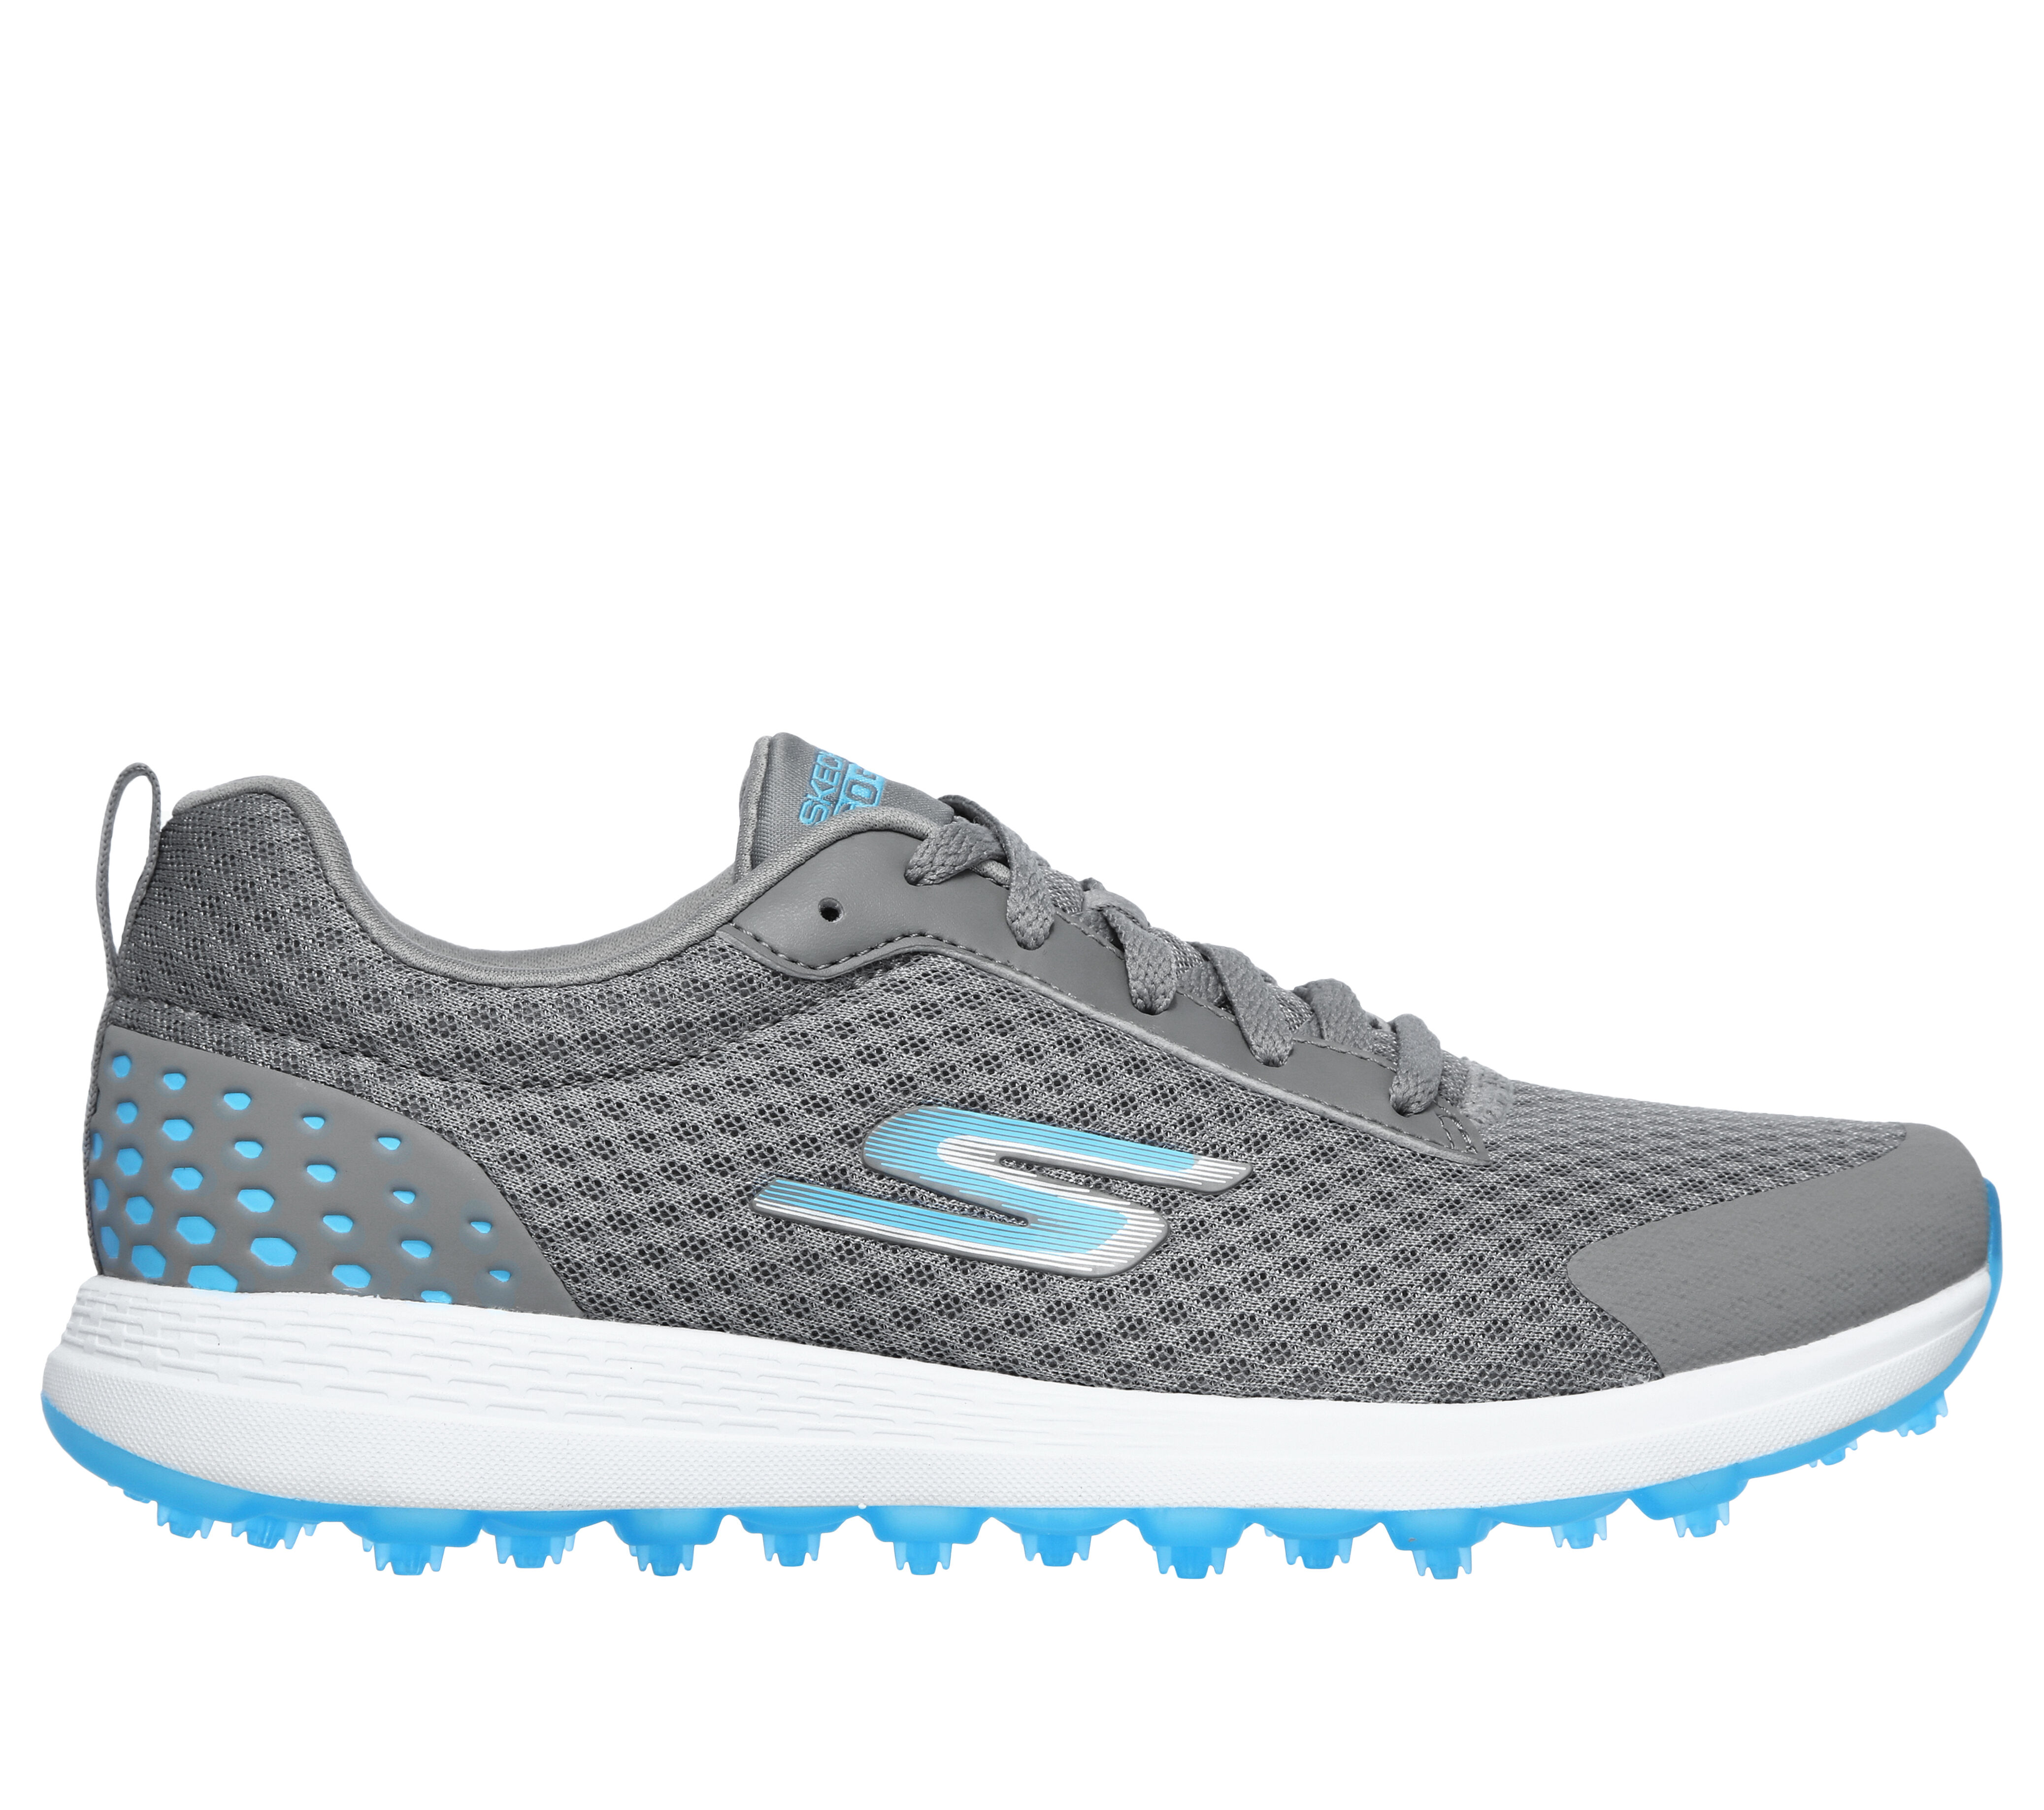 skechers golf shoes coupon